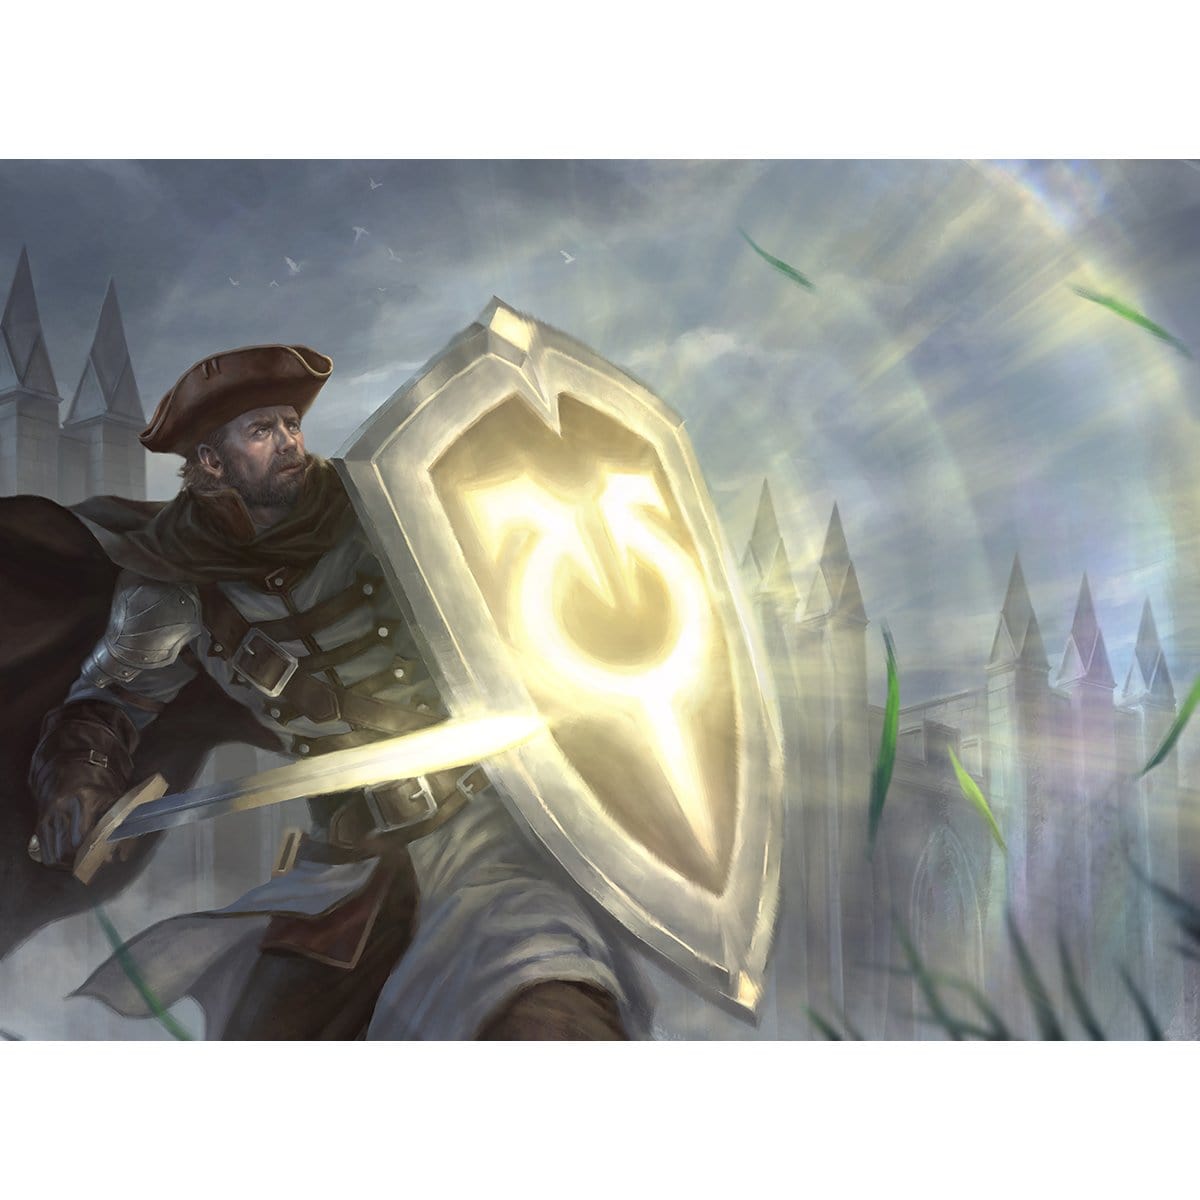 Tactical Advantage Print - Print - Original Magic Art - Accessories for Magic the Gathering and other card games